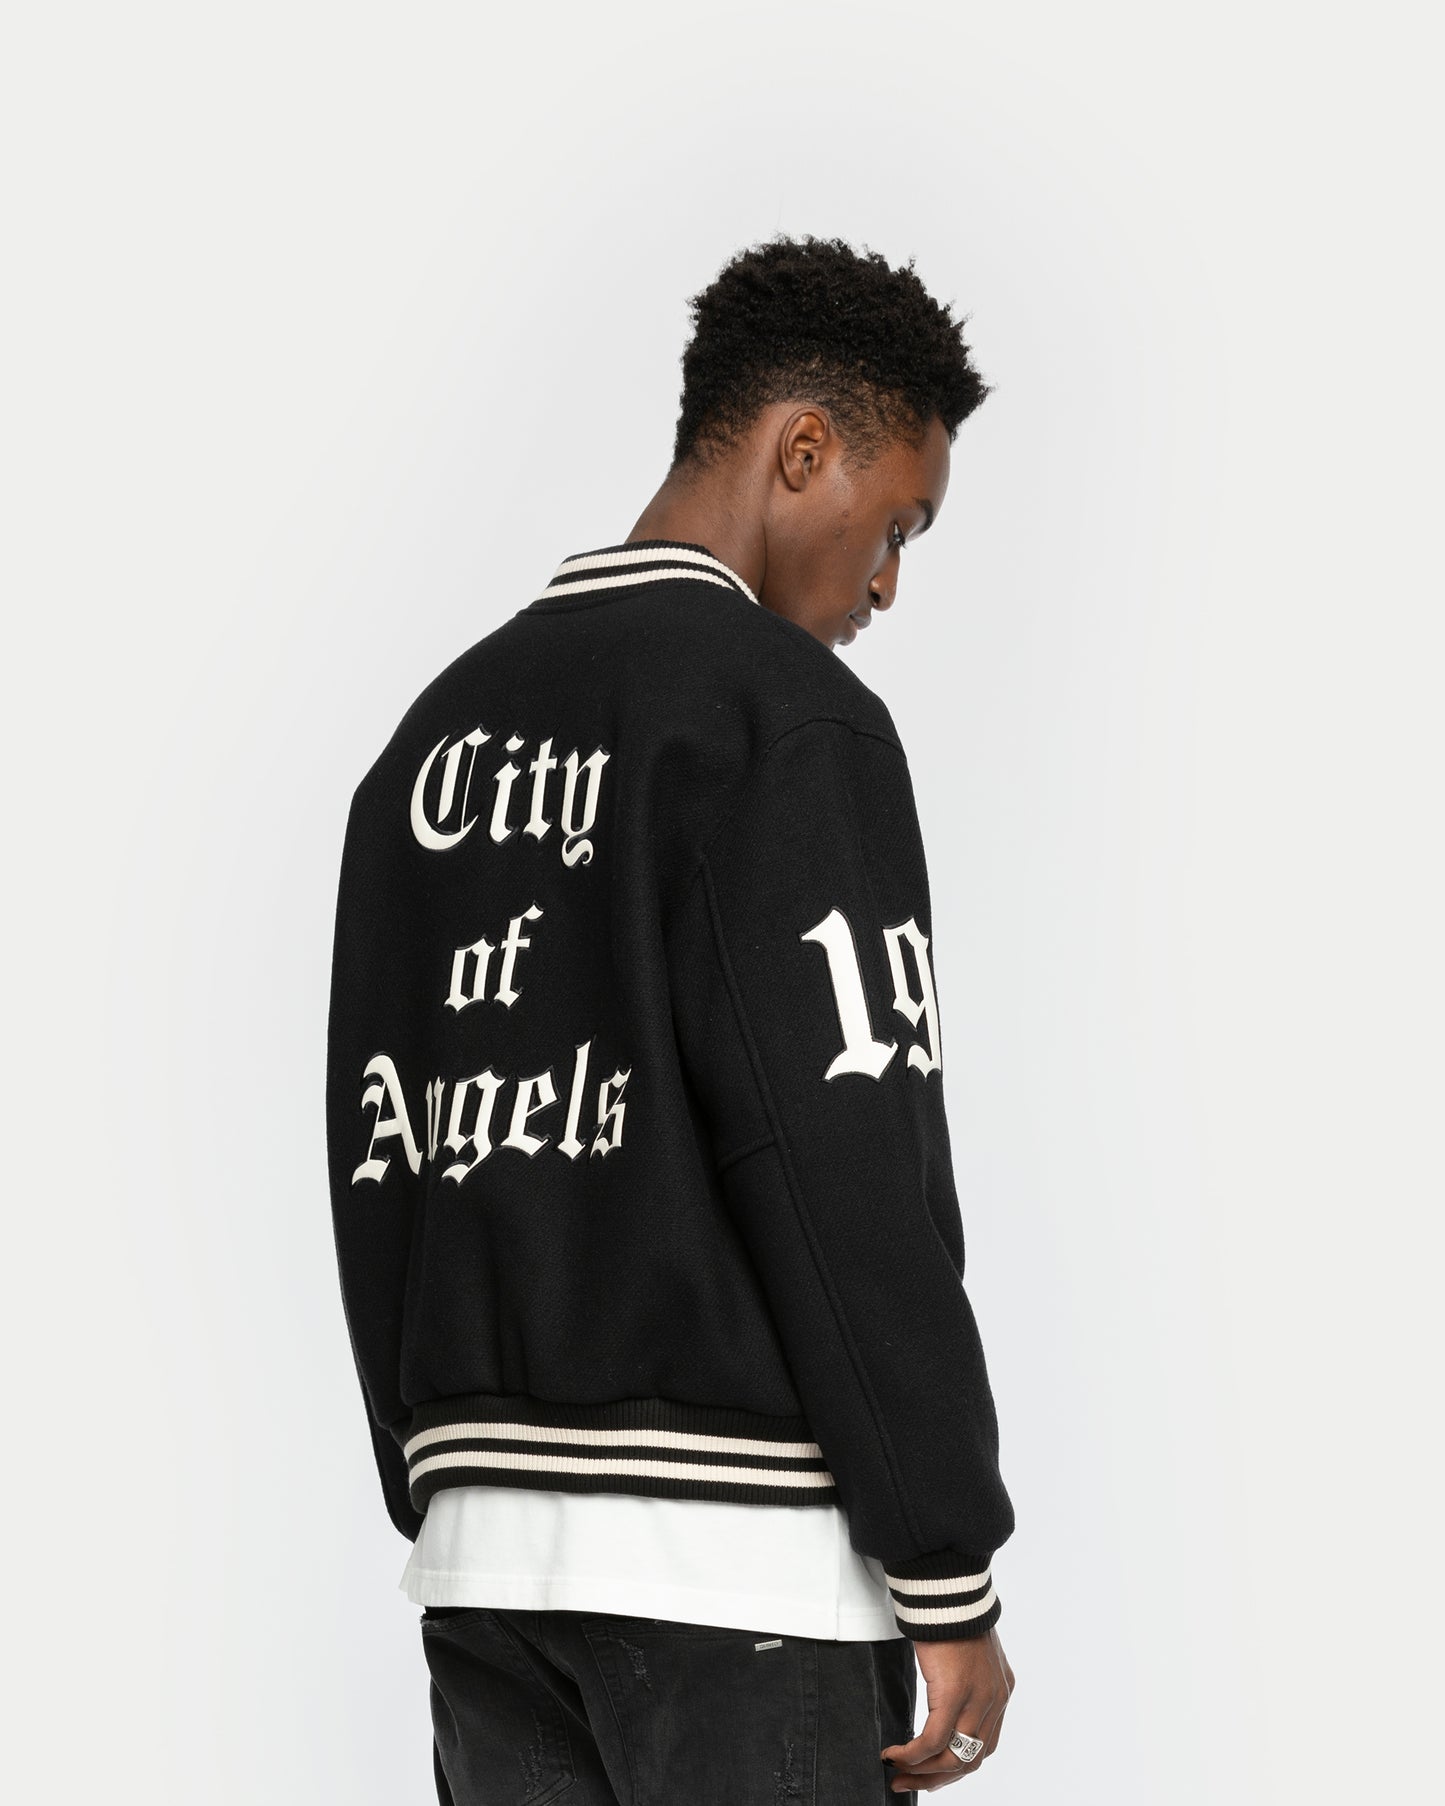 CITY OF ANGELS COLLEGE JACKET